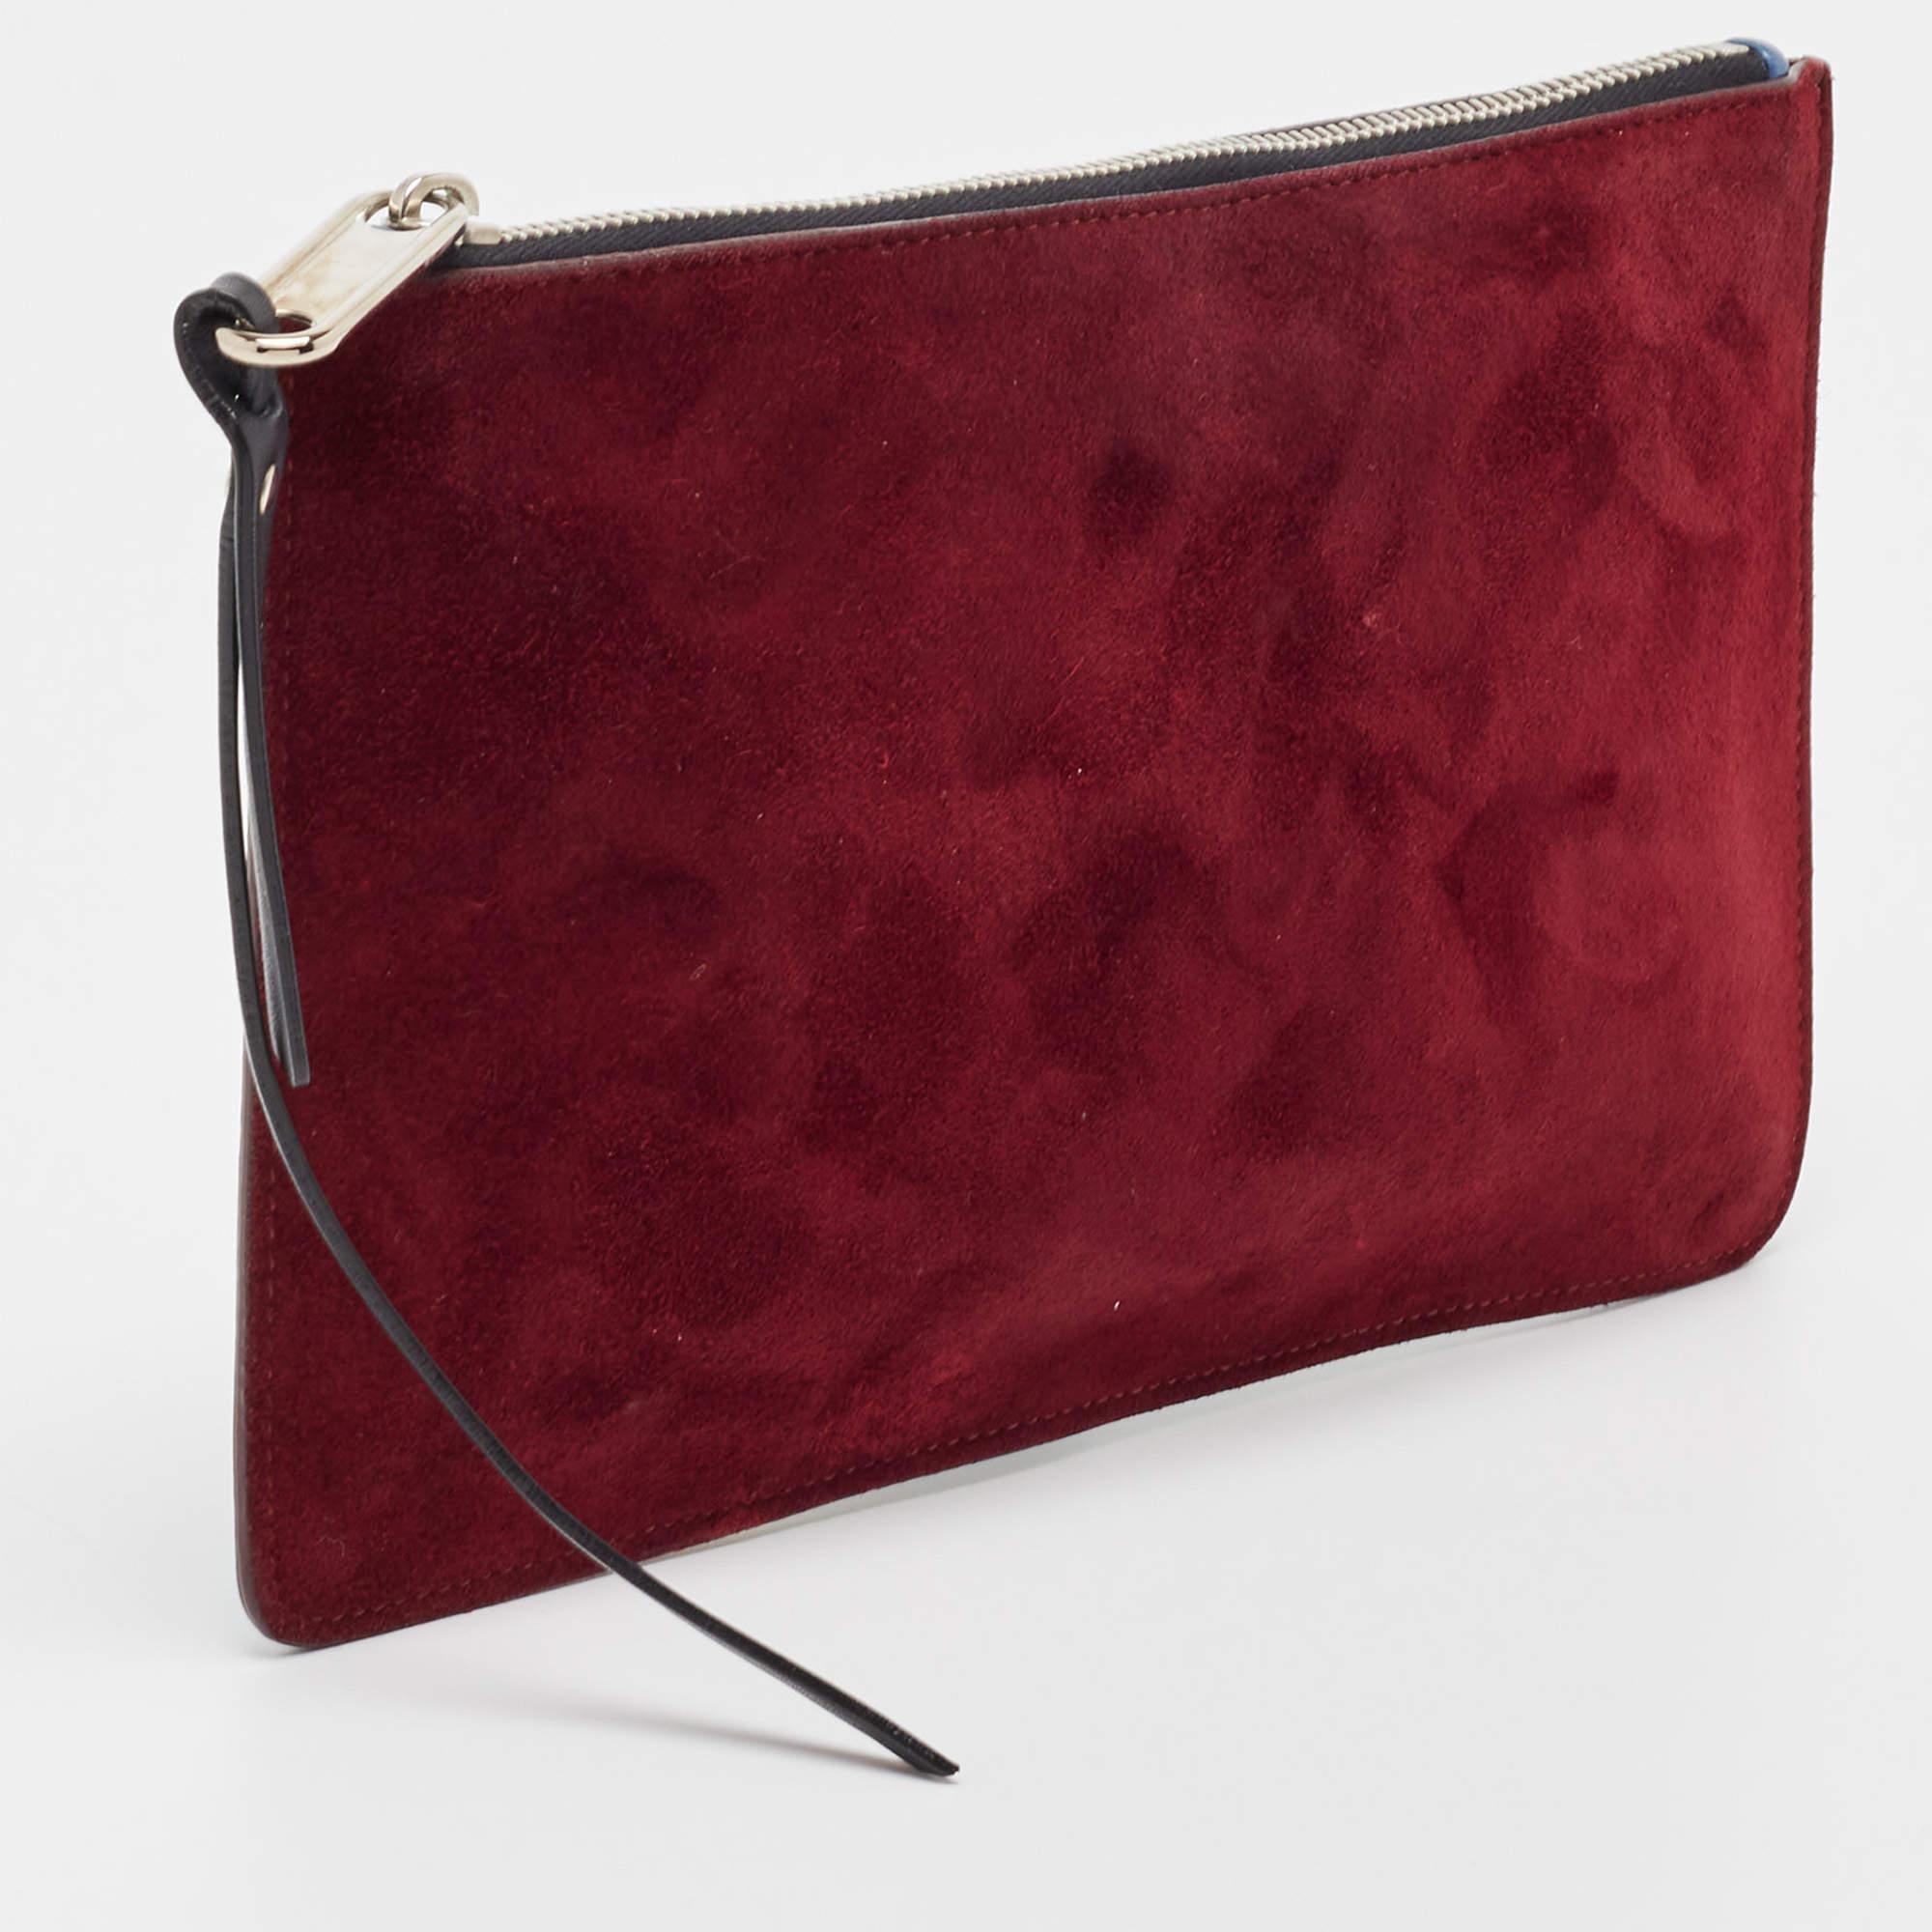 This designer clutch is a creation marked by excellent craftsmanship and refined style. This zip clutch is crafted with skill and impeccably finished to be a luxurious accessory in your hand.

